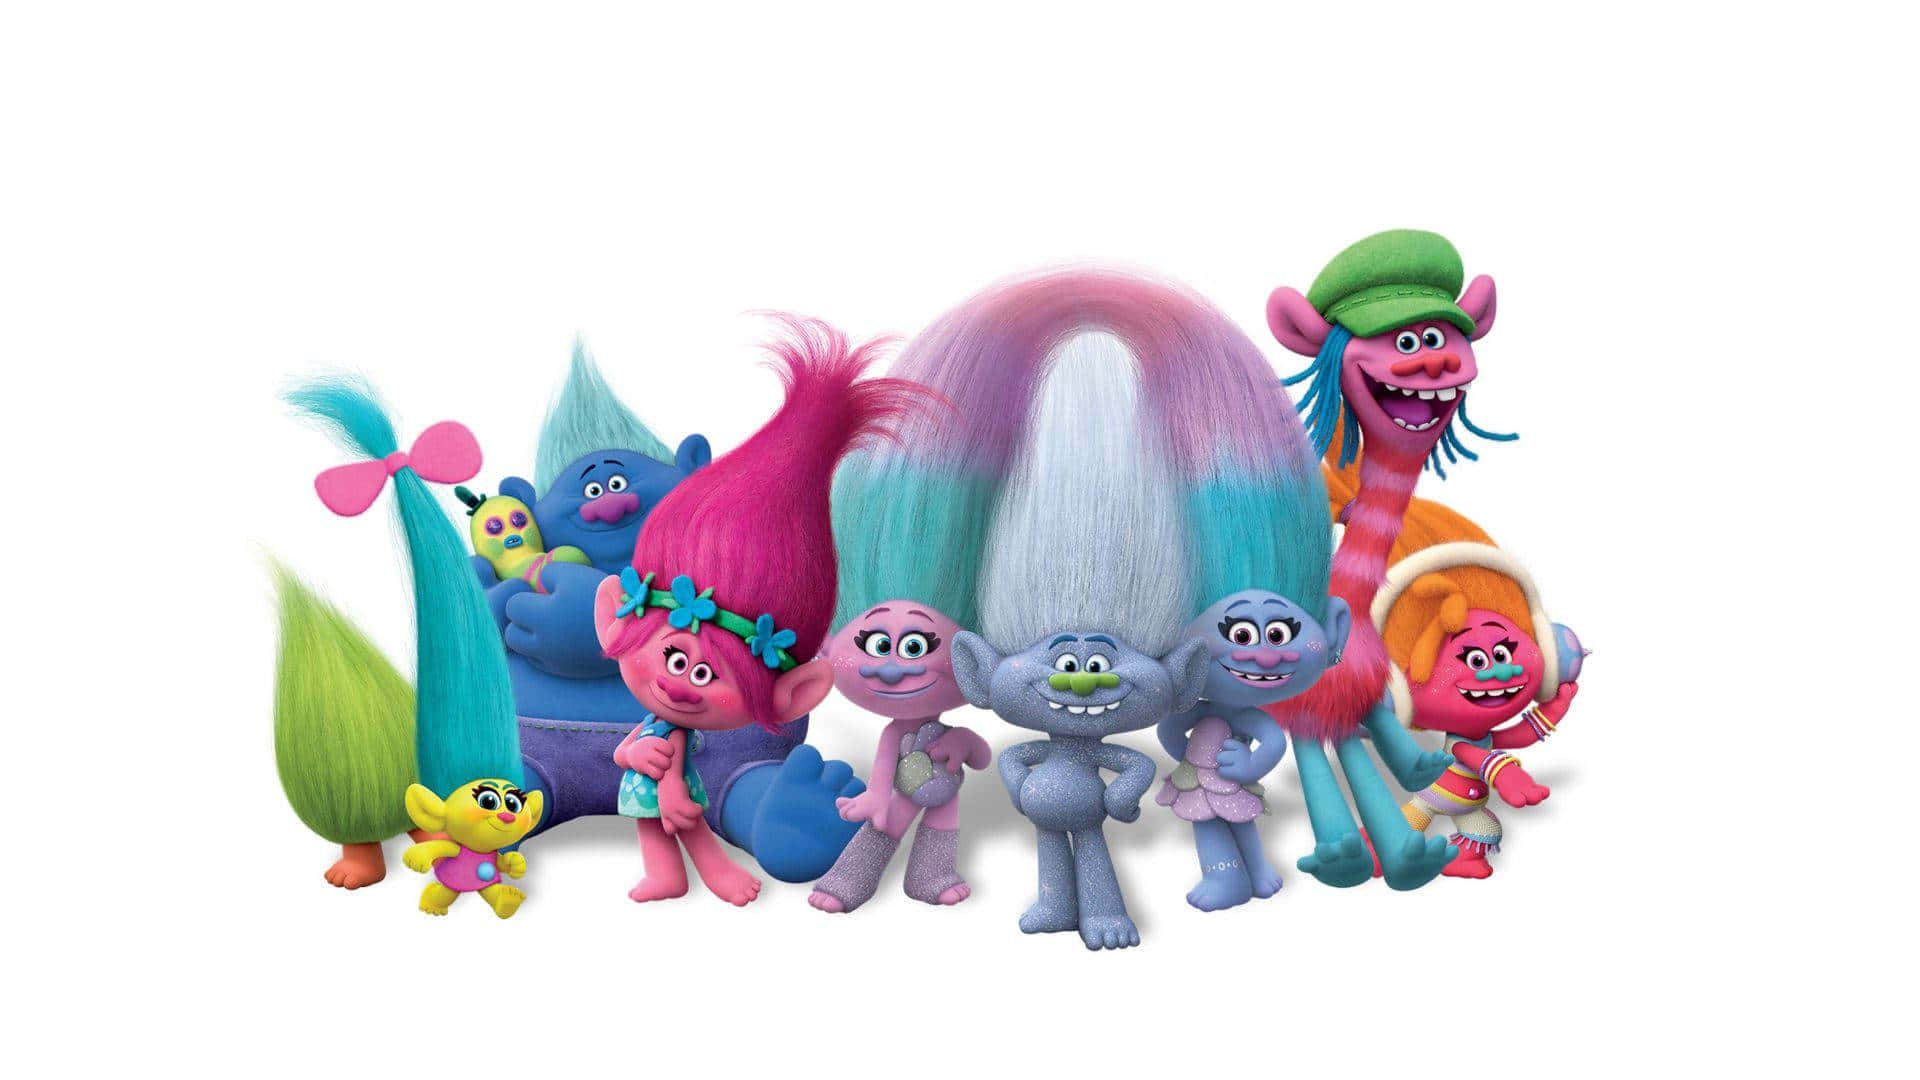 Join Poppy and her friends in the wonderful world of Trolls